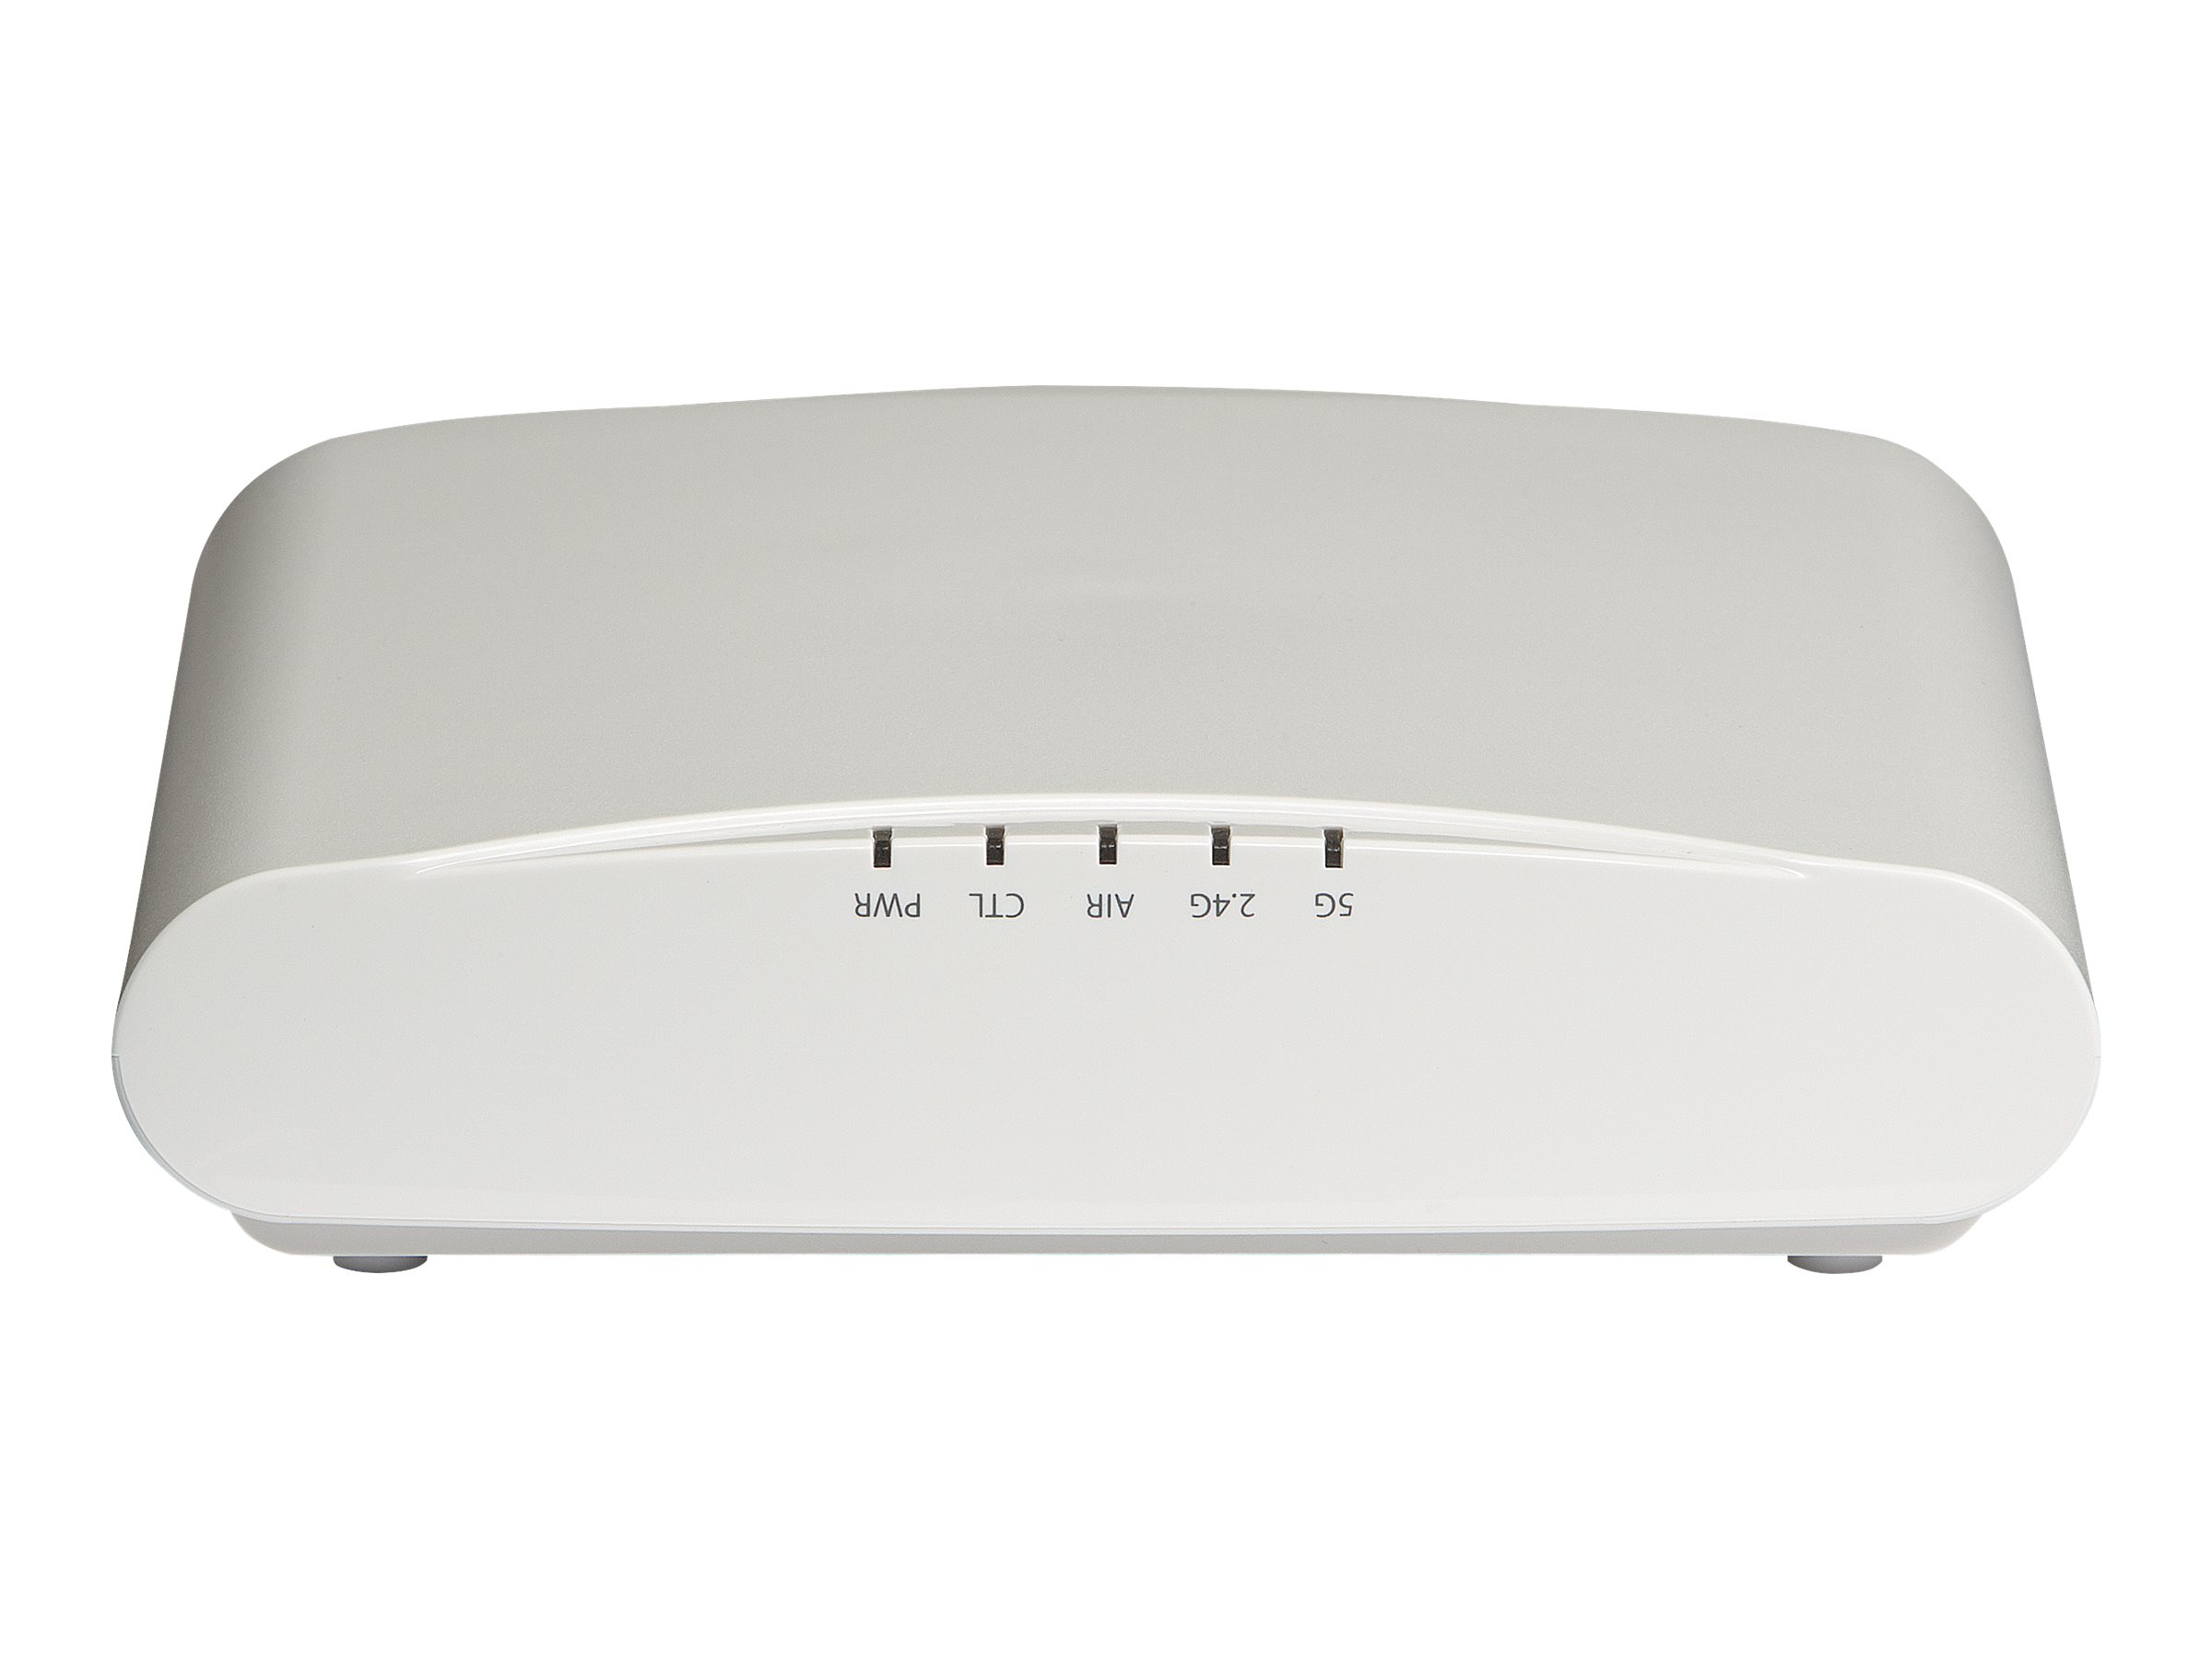 Ruckus Access Point R610 - Unleashed - Indoor Access Point